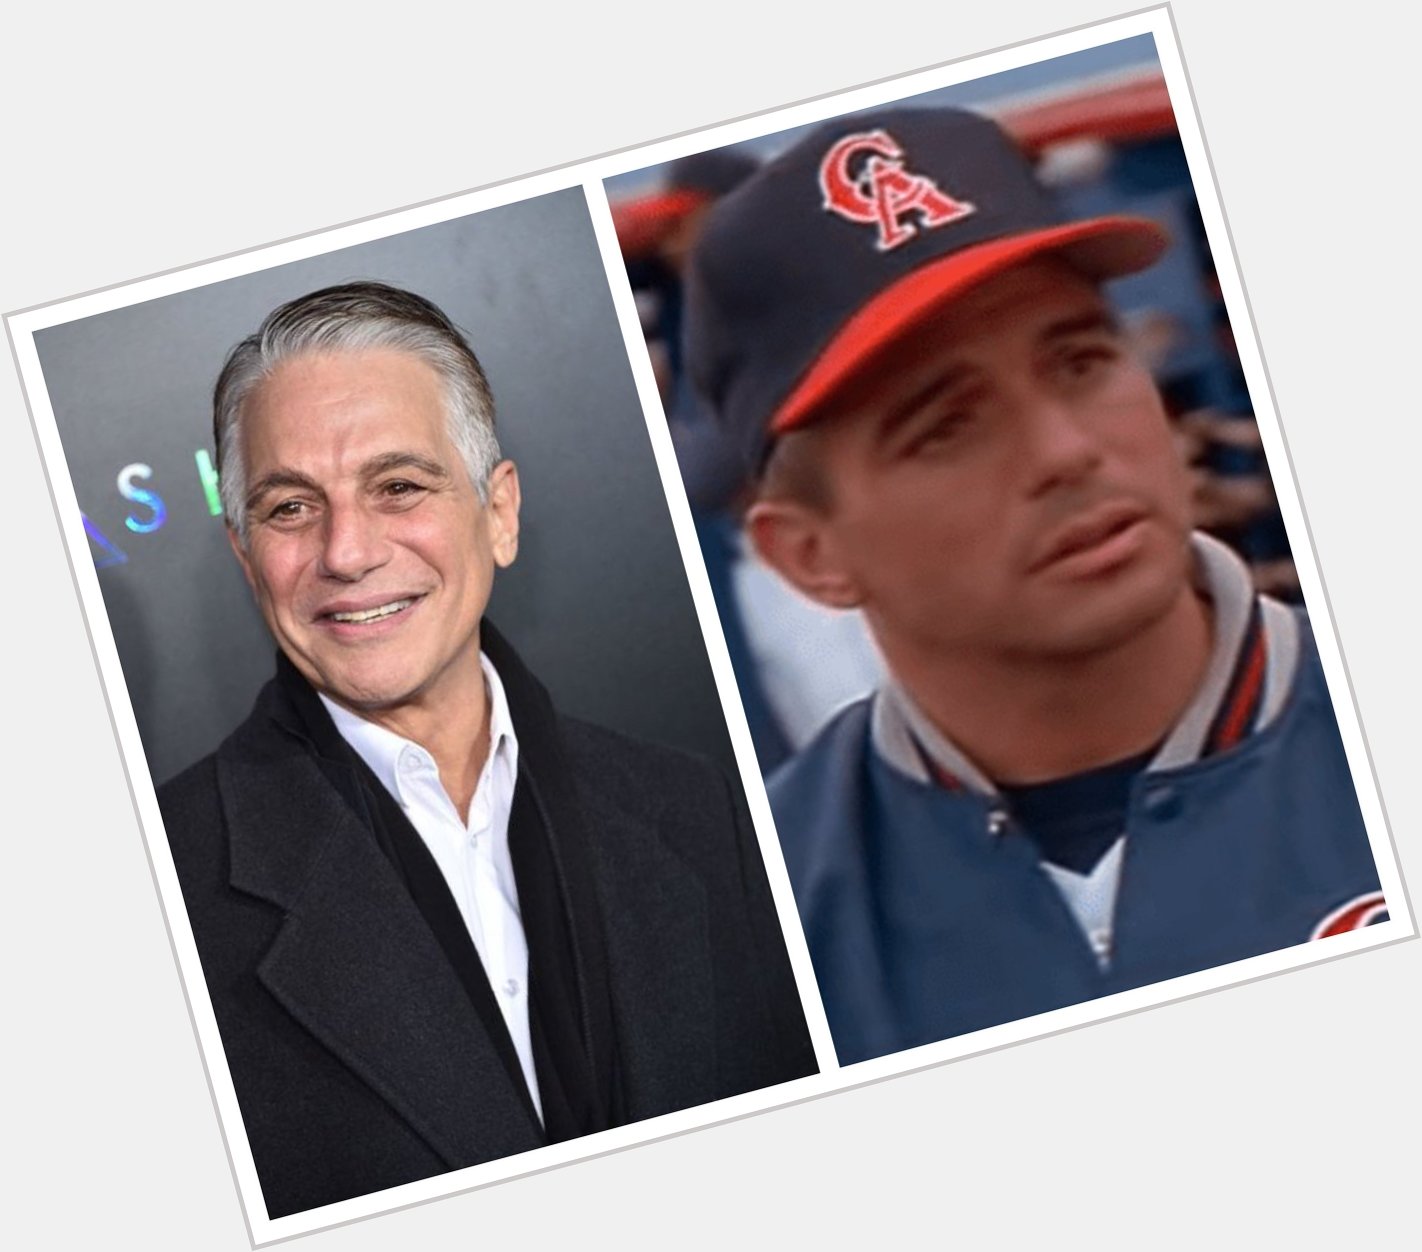 Happy 69th Birthday to Tony Danza! The actor who played Mel Clark in Angels in the Outfield (1994). 